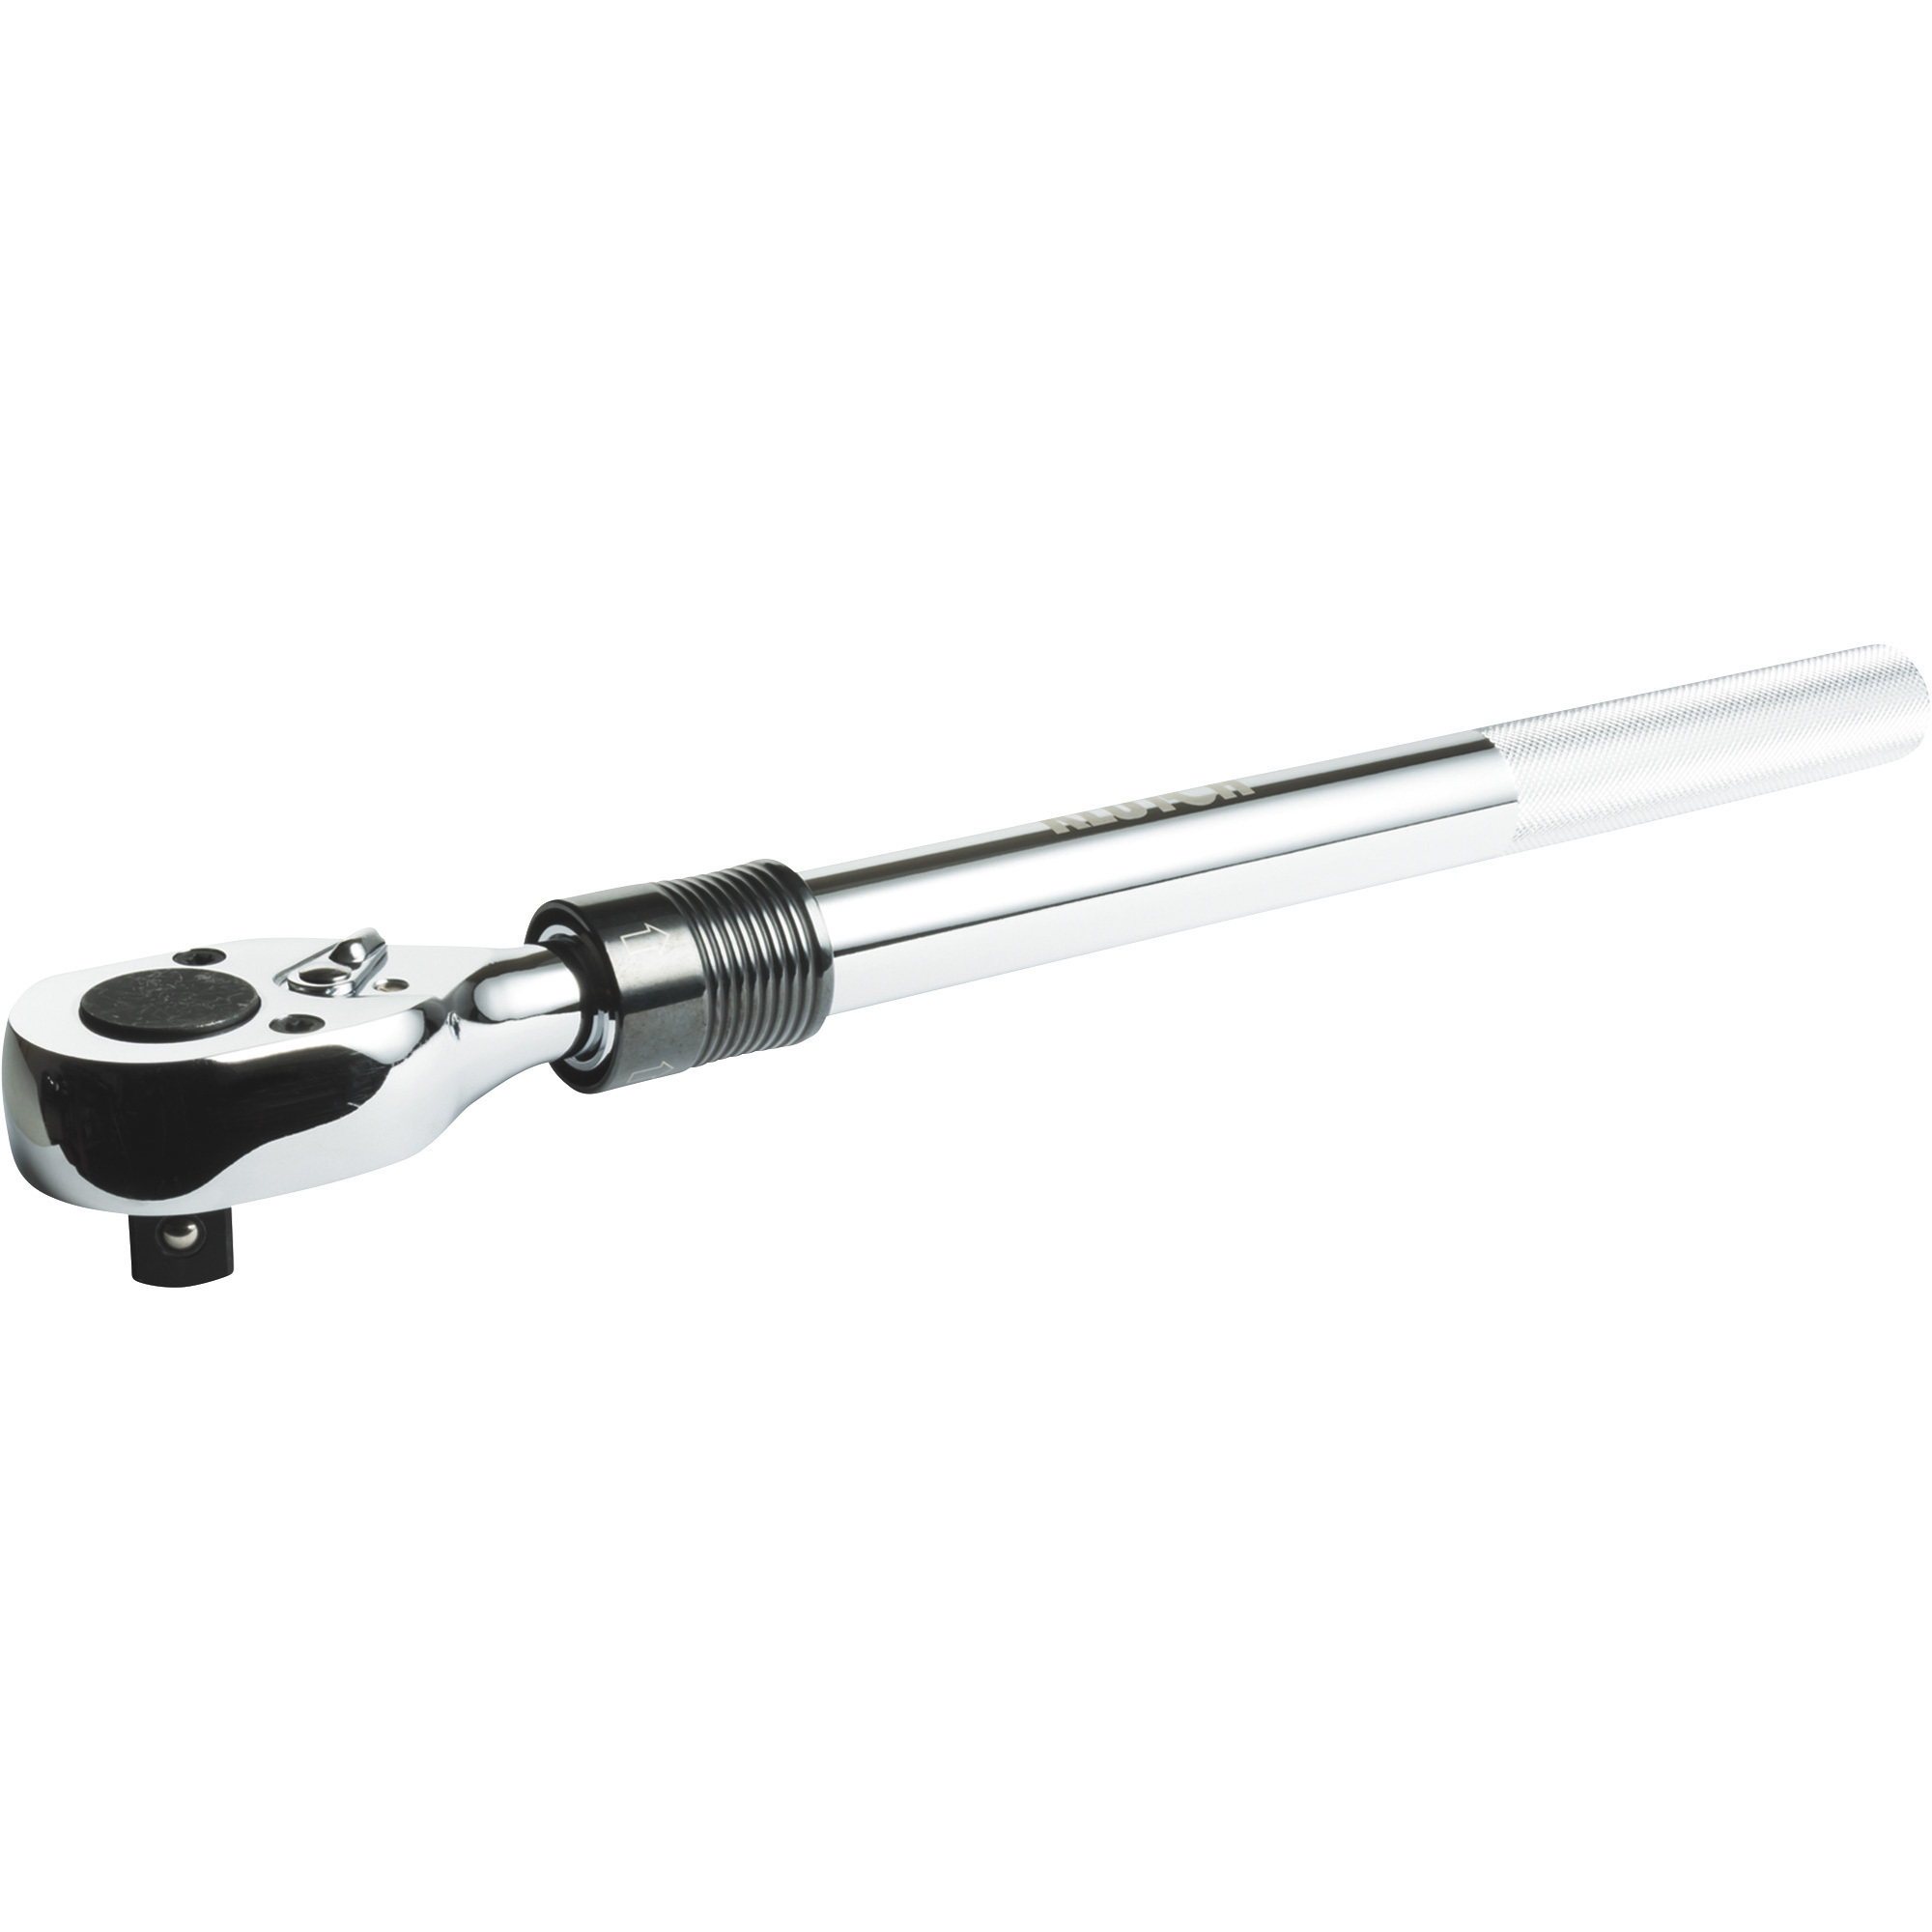 Klutch Extra-Long Extendable Ratchet, 3/4Inch Drive, 19 1/2Inch to 30Inch Range